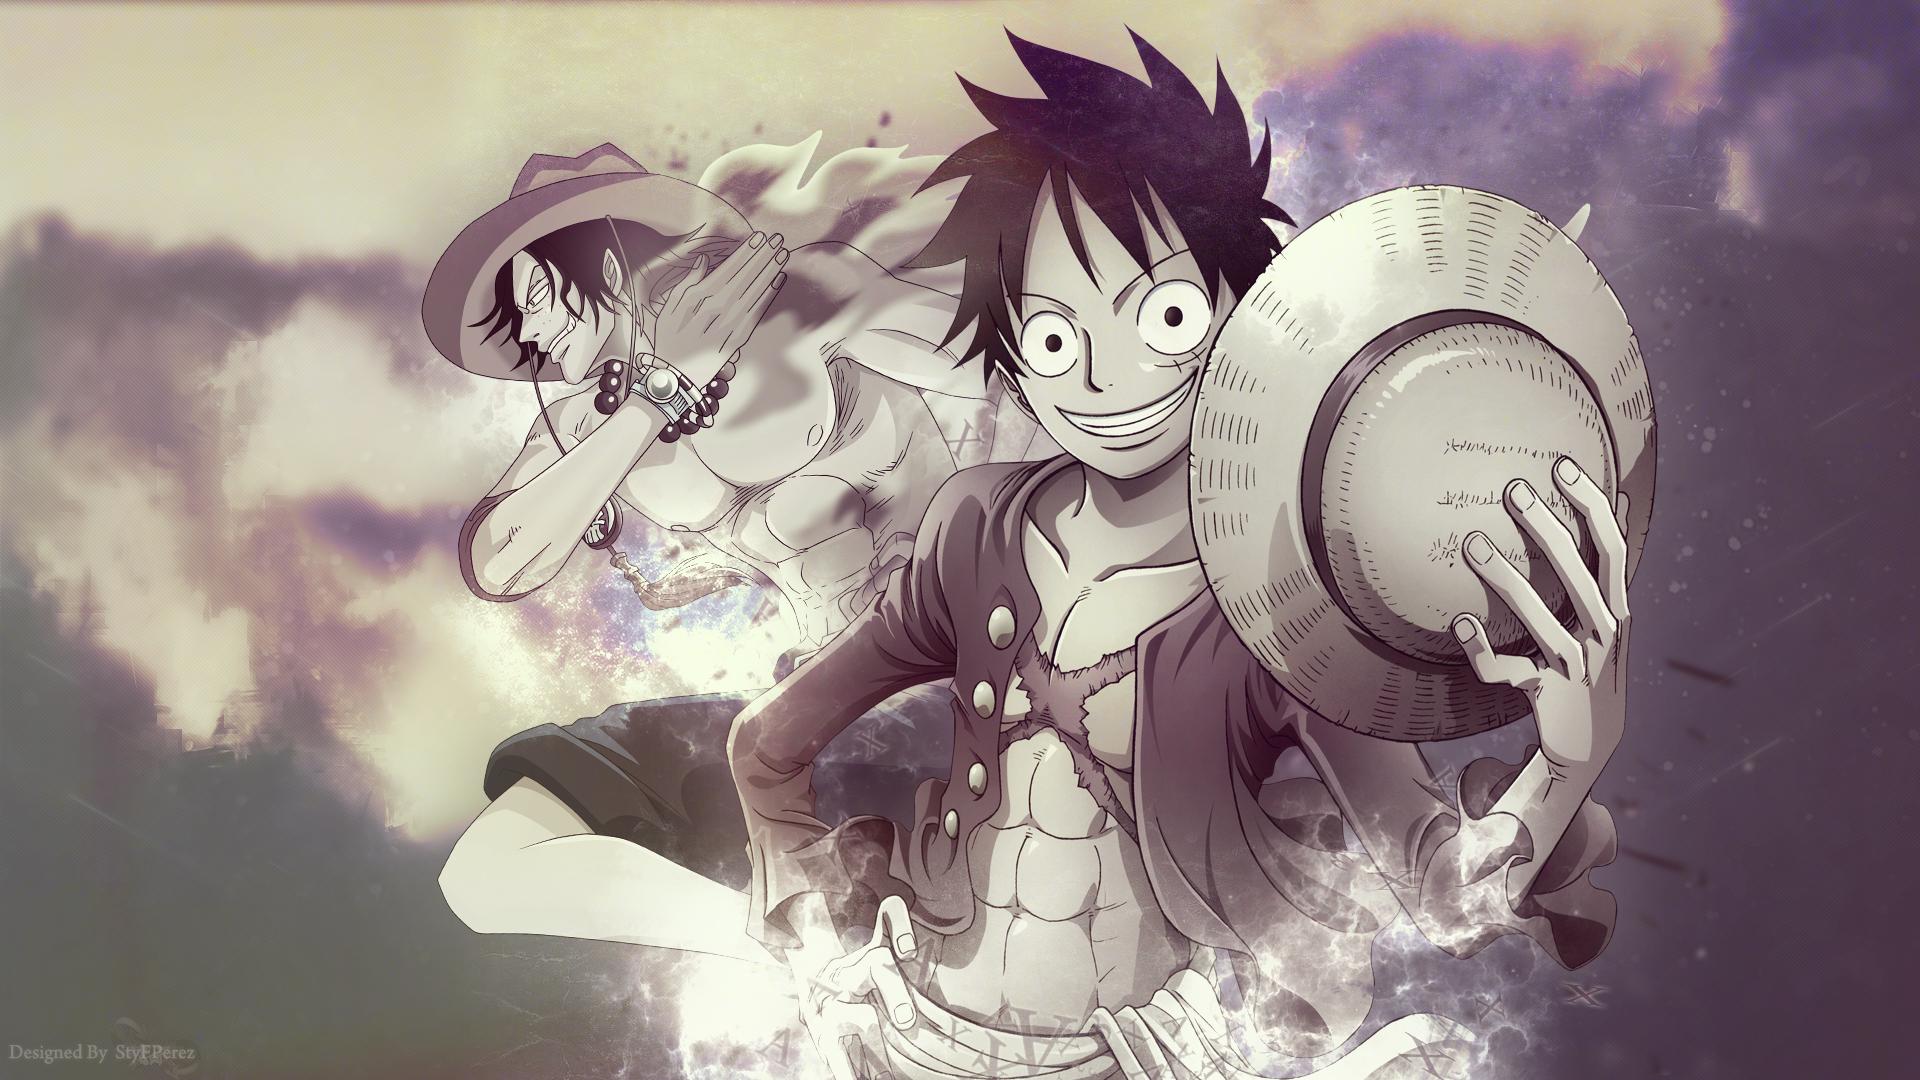 1920 x 1080 · png - Luffy and Ace by StyF17 on DeviantArt